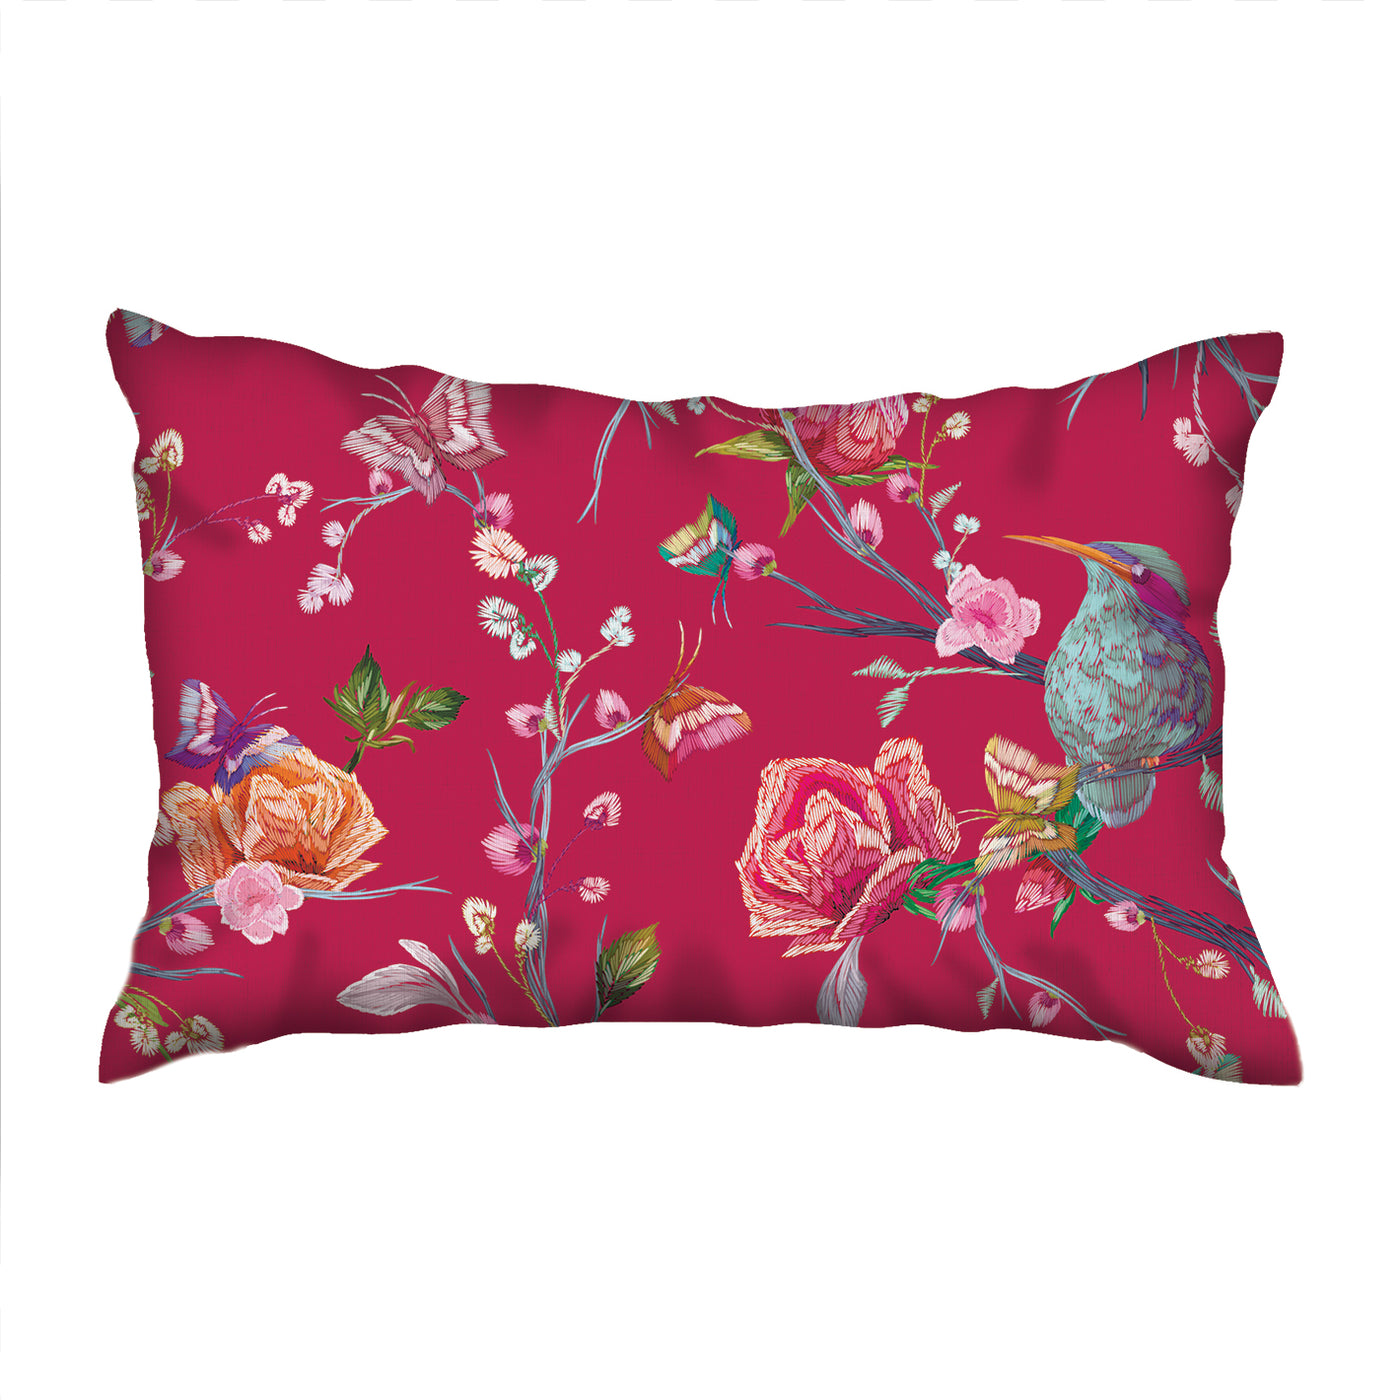 Scatter Cushion - Delicate Floral pattern - Burgundy